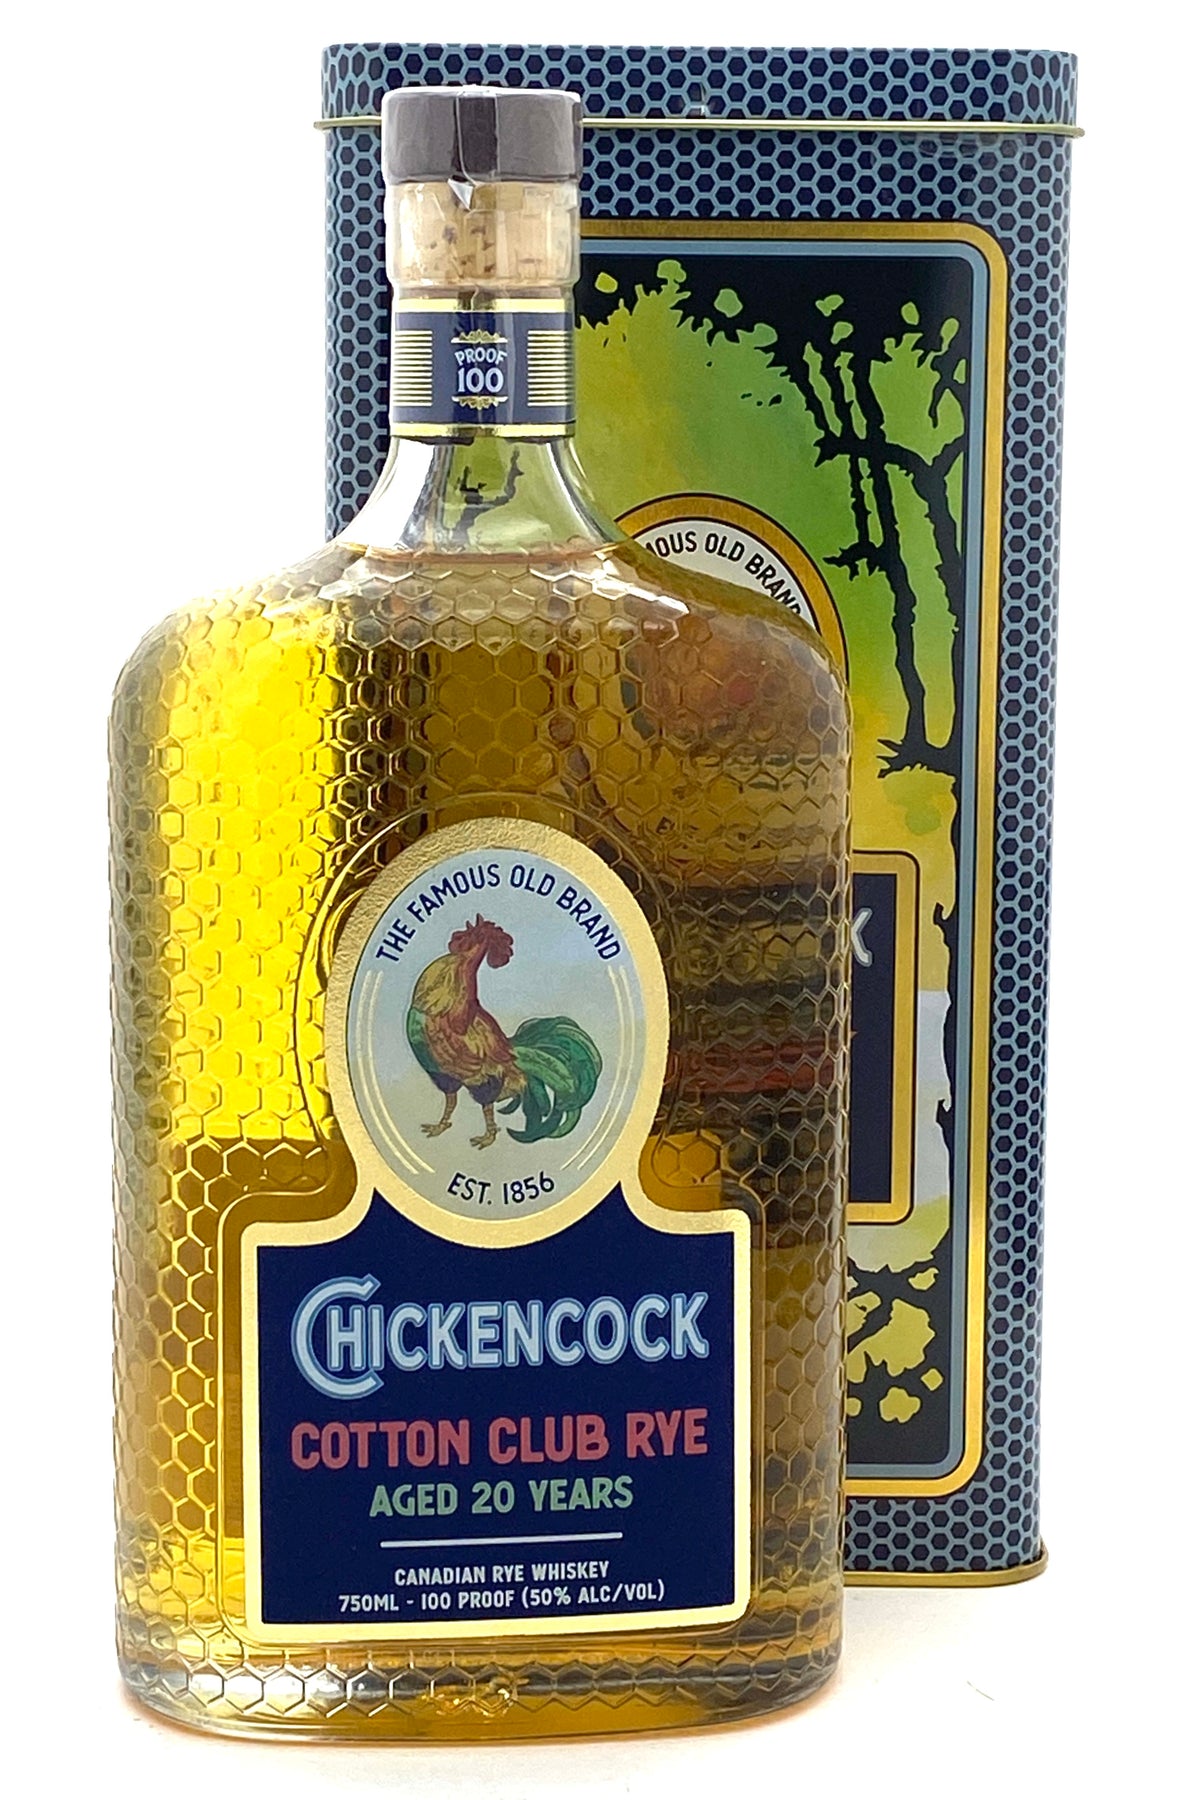 Chicken Cock Aged 20 Years Cotton Club Rye Whiskey